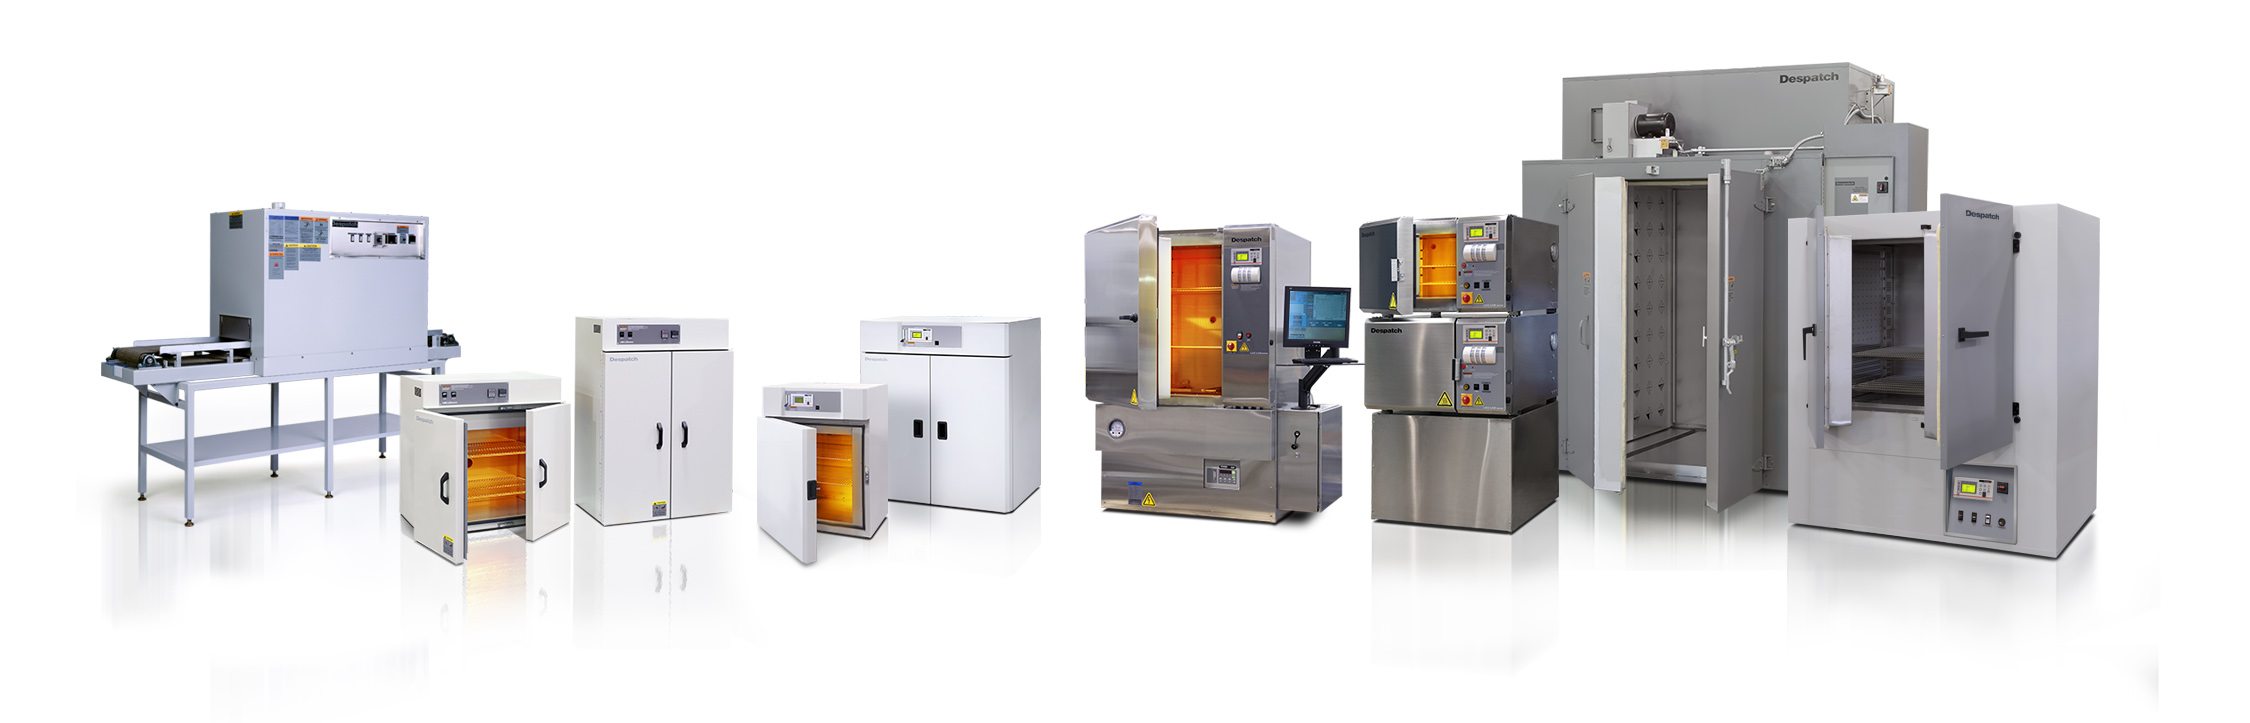 Curing Ovens - Industrial Curing & Composite Ovens - Industrial Ovens,  Laboratory Ovens and Incubator Manufacturers - Genlab Limited